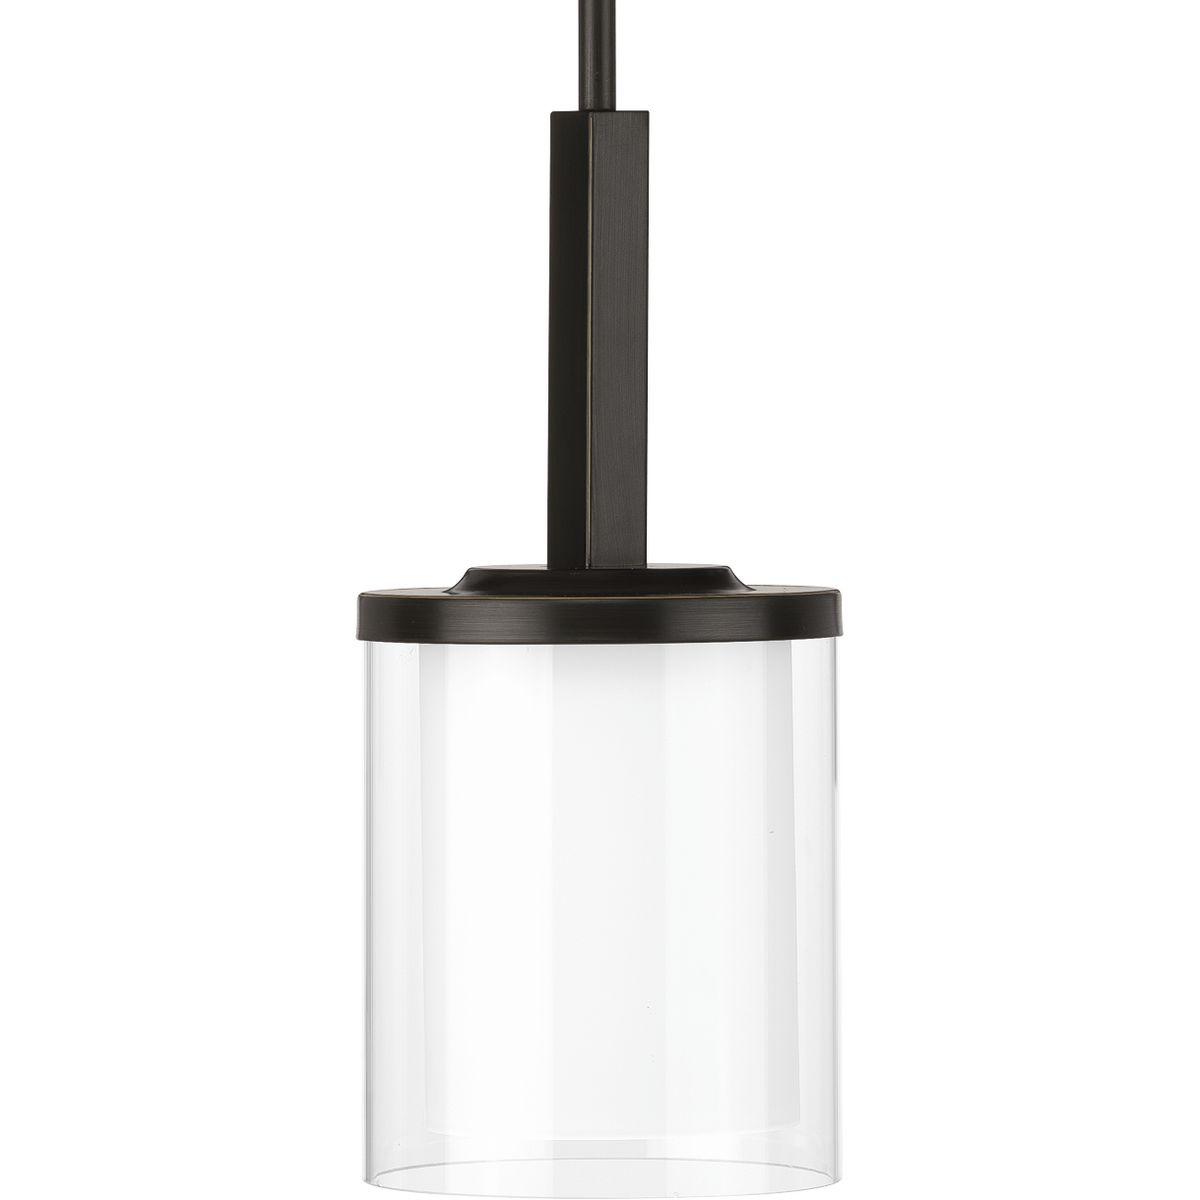 Hubbell P500192-020 Sleek lines and the union of Antique Bronze and faux wood accents enhance the calming demeanor of the Mast one-light mini-pendant. A fitting choice for shining light onto a countertop or over a dining table or kitchen island in coastal and modern farmhous